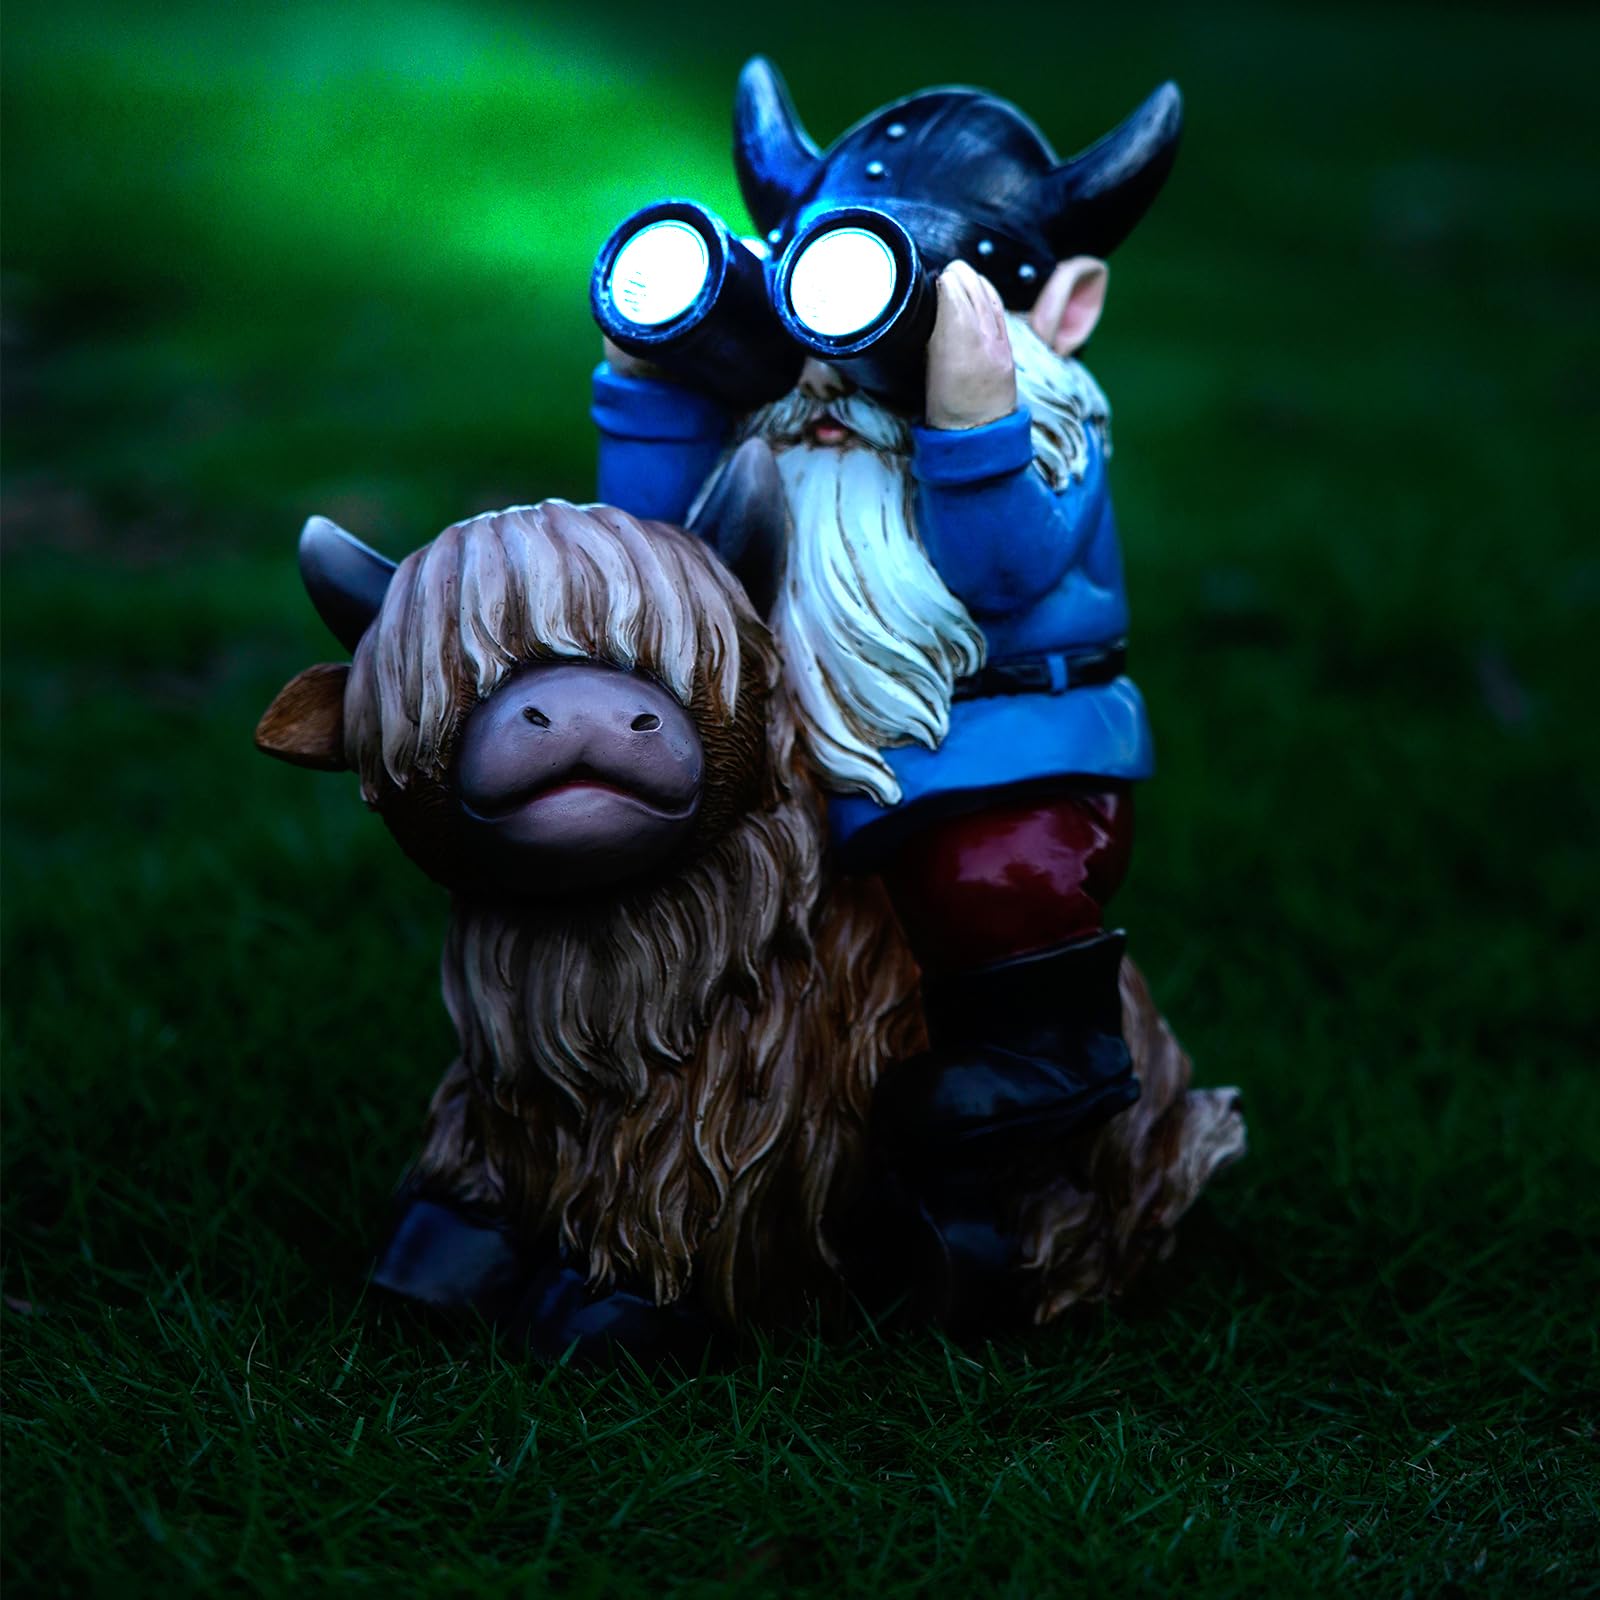 Joint Honglin Garden Gnome Statues Resin Gnome Sitting on Highland Cow Solar LED Lights Outdoor Telescope Gnome Gifts for Yard, Patio Decor (Cow Gnome)